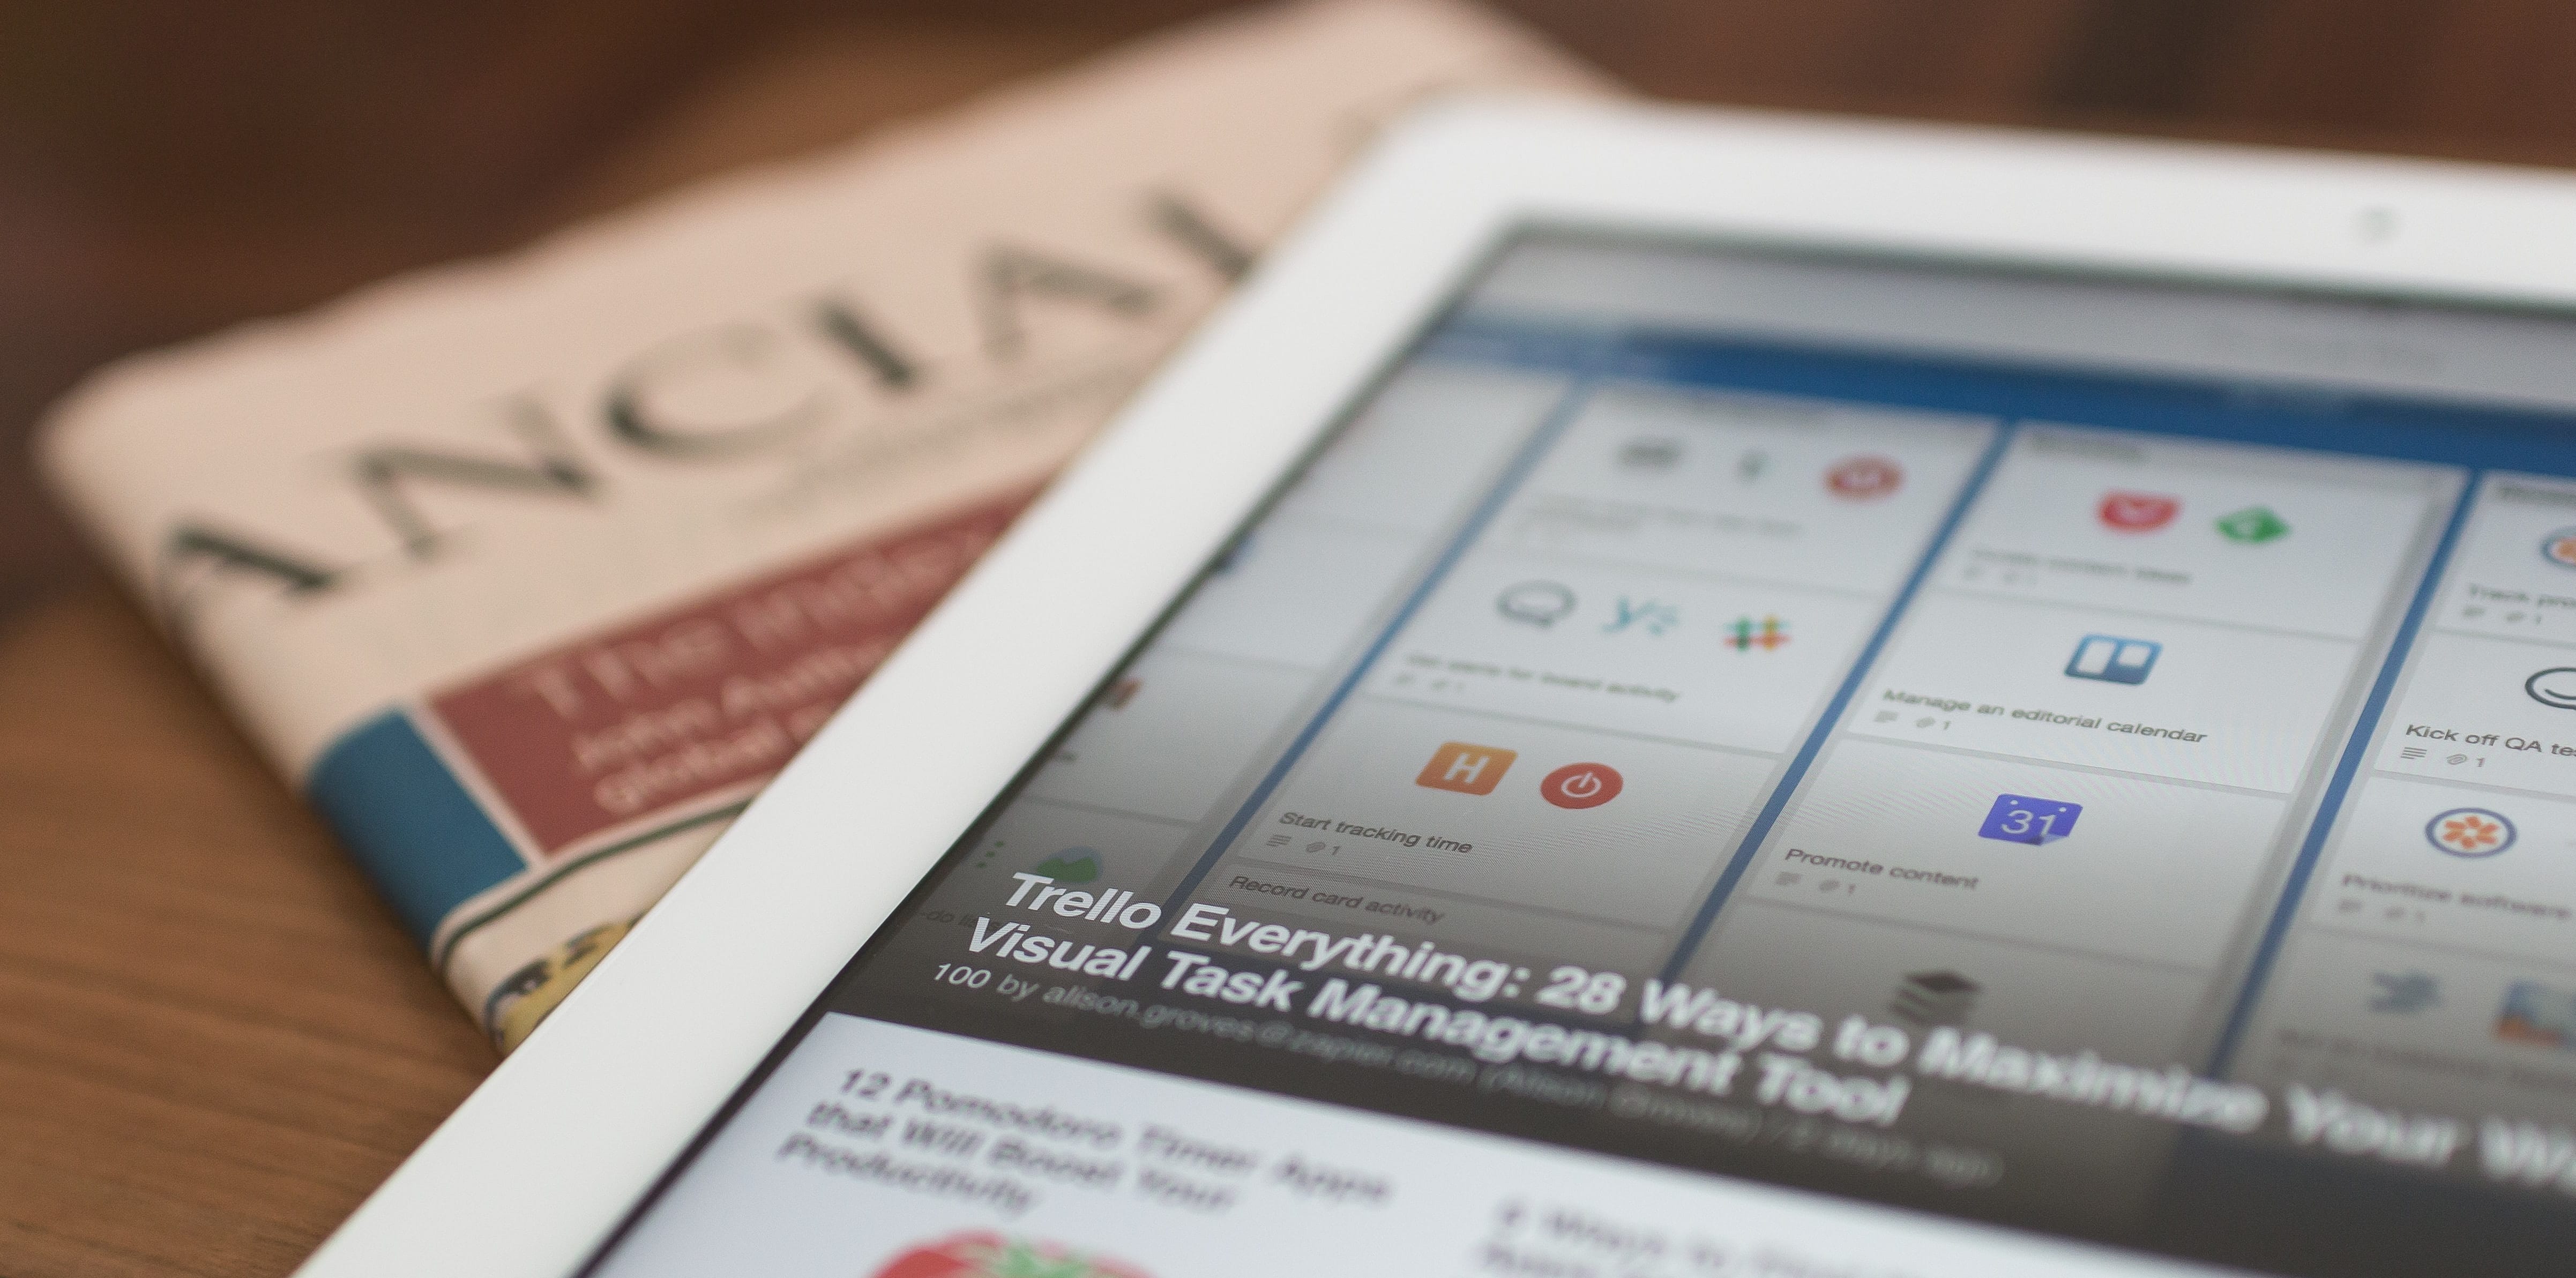 White tablet computer on top of newspaper financial section; image by Matthew Guay, via Unsplash.com.